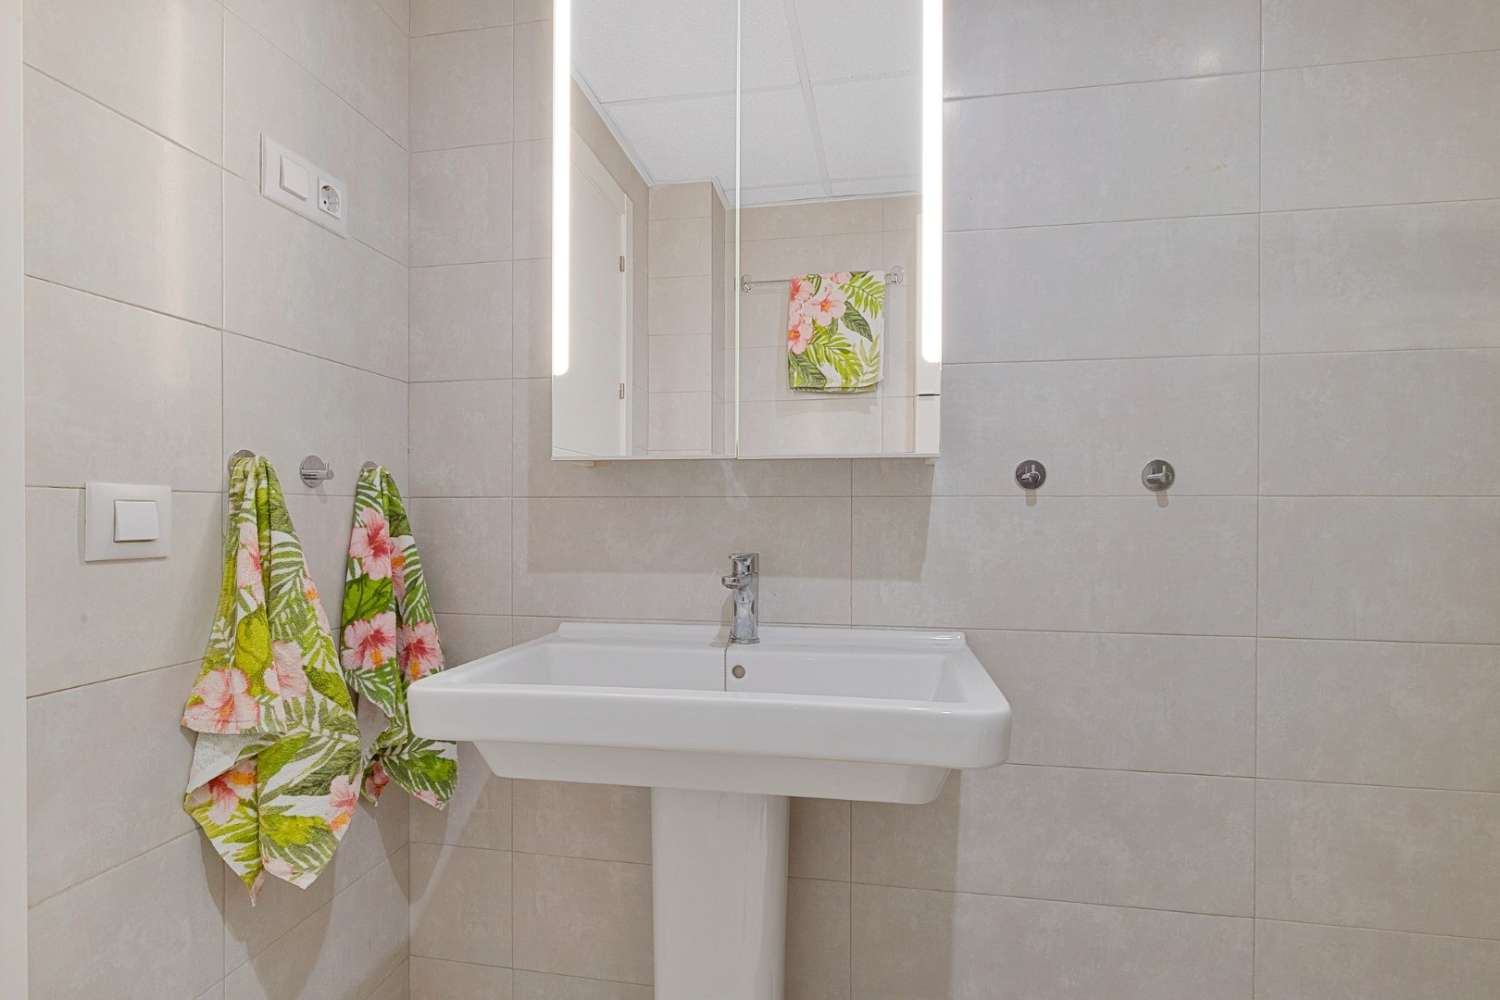 Bright, nice apartment in Los Boliches, Fuengirola, only 300 meters to the train station and 450 meters to the sea